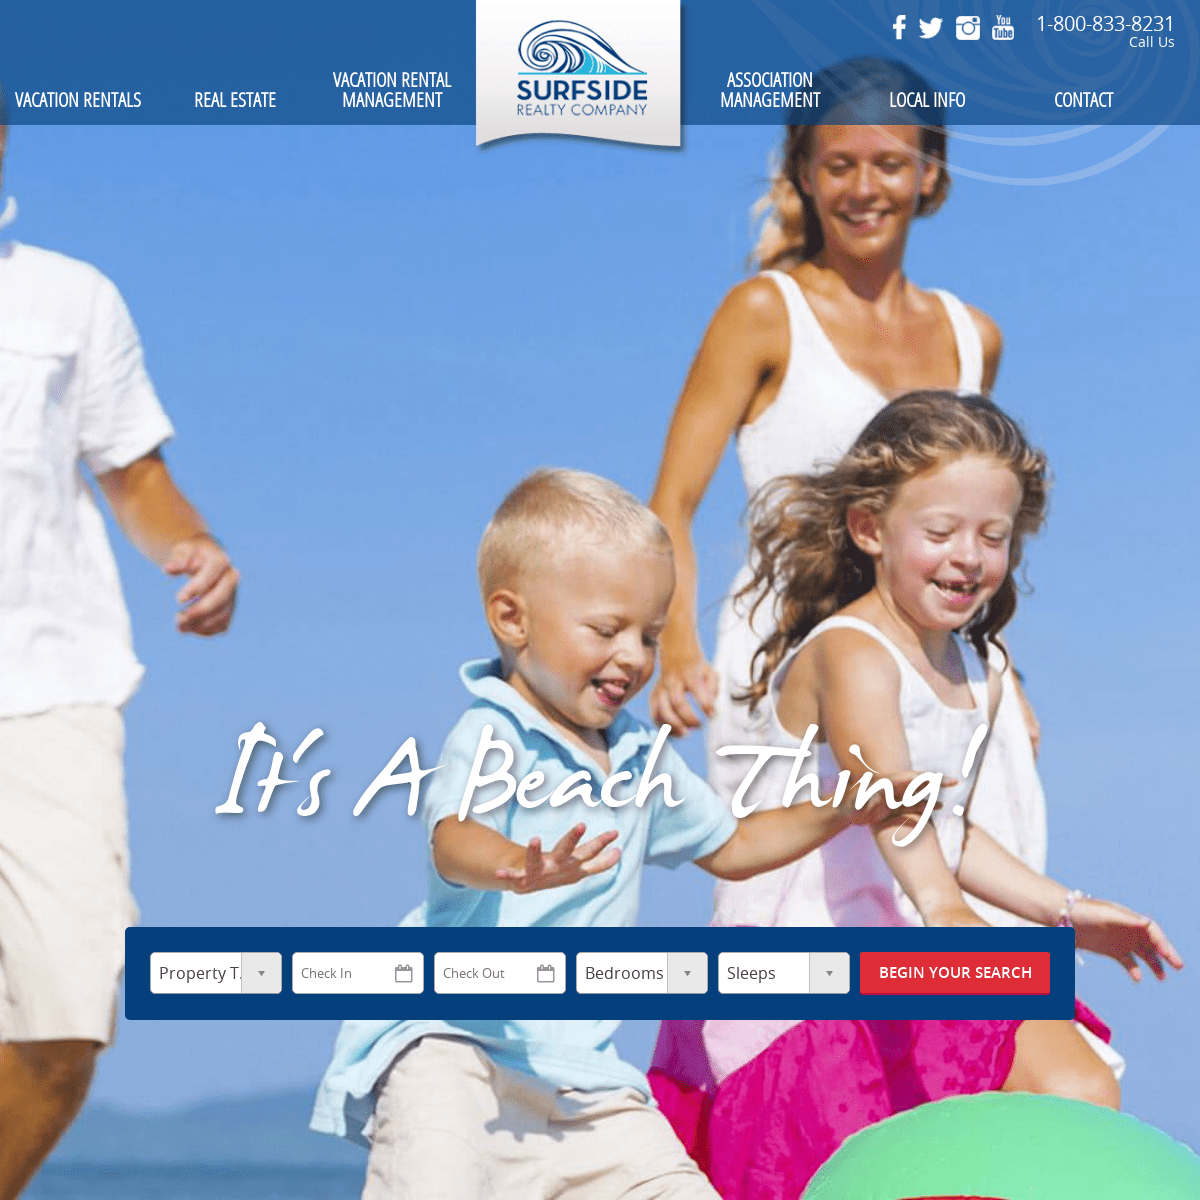 Surfside Beach Rentals & Vacations - Surfside Realty